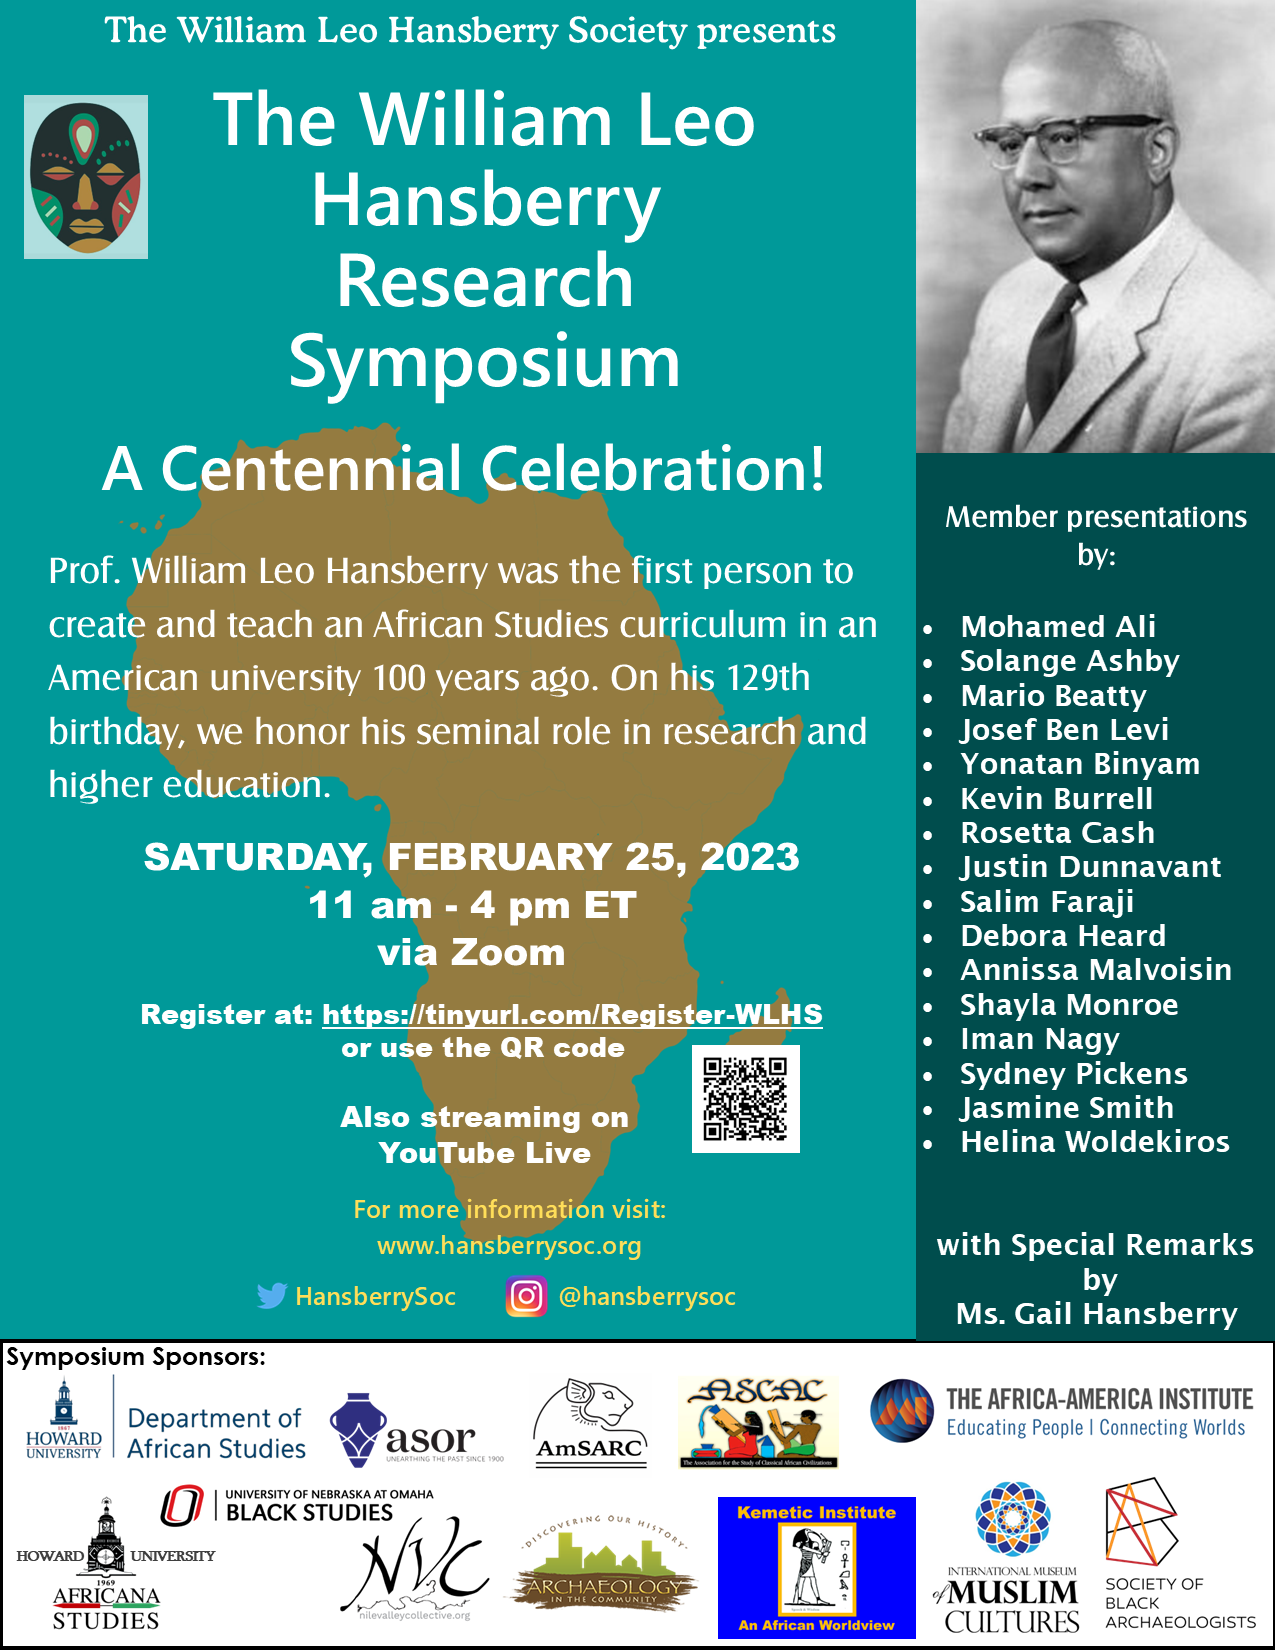 Image of William Leo Hansberry on flier for the William Leo Hansberry Society Research Symposium.